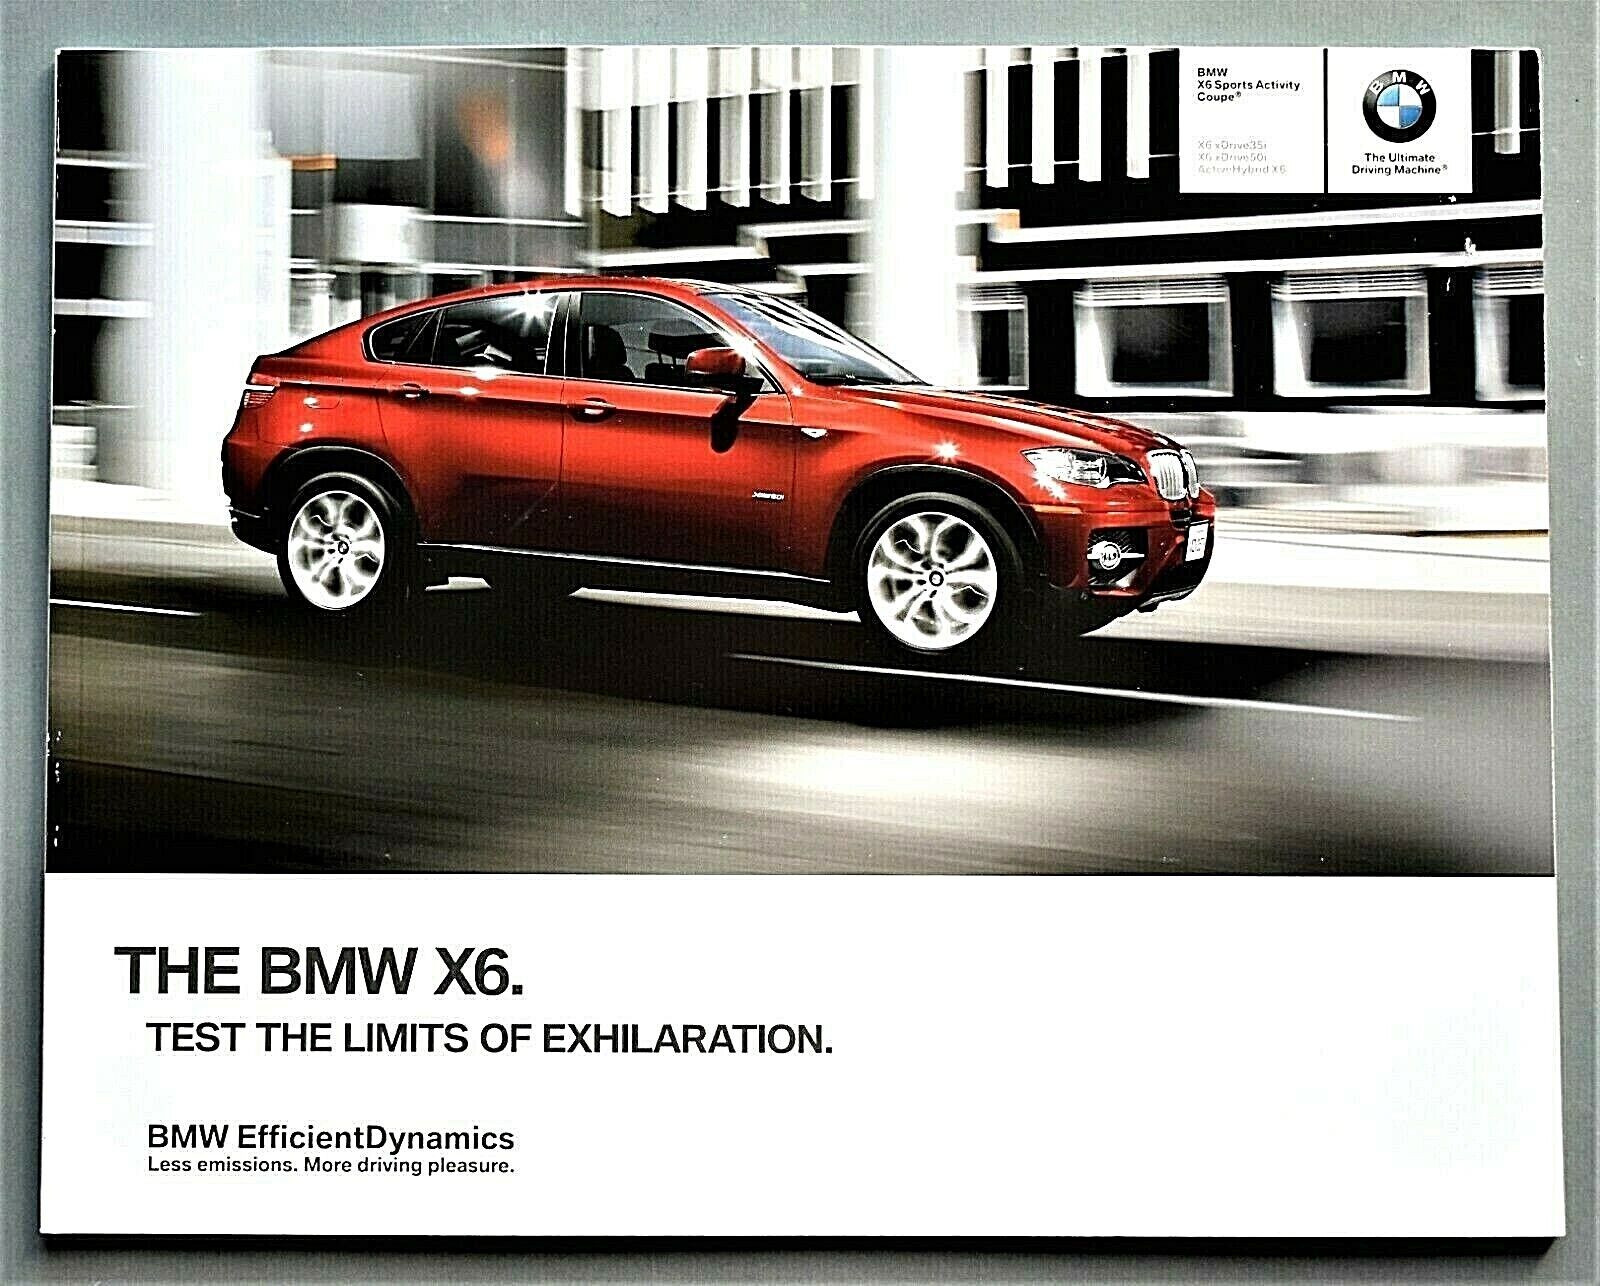 Awesome 2011 Bmw X6 Series 60 Page Prestige Sales Brochure ~ Excellent